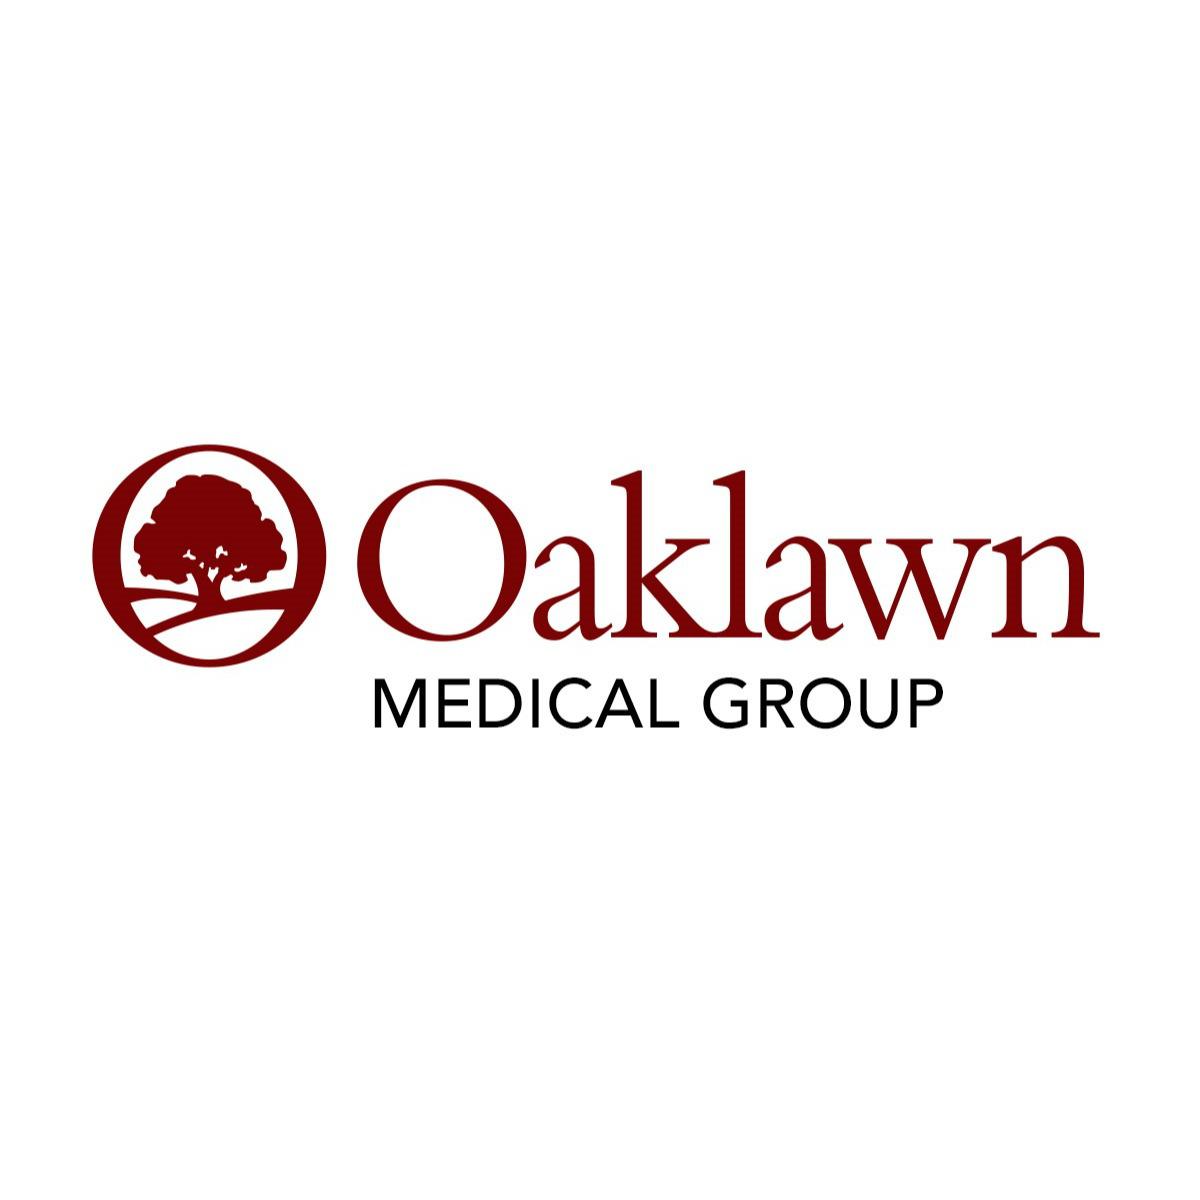 Oaklawn Medical Group - Wright Medical Primary Care - Marshall, MI 49068 - (269)781-2111 | ShowMeLocal.com